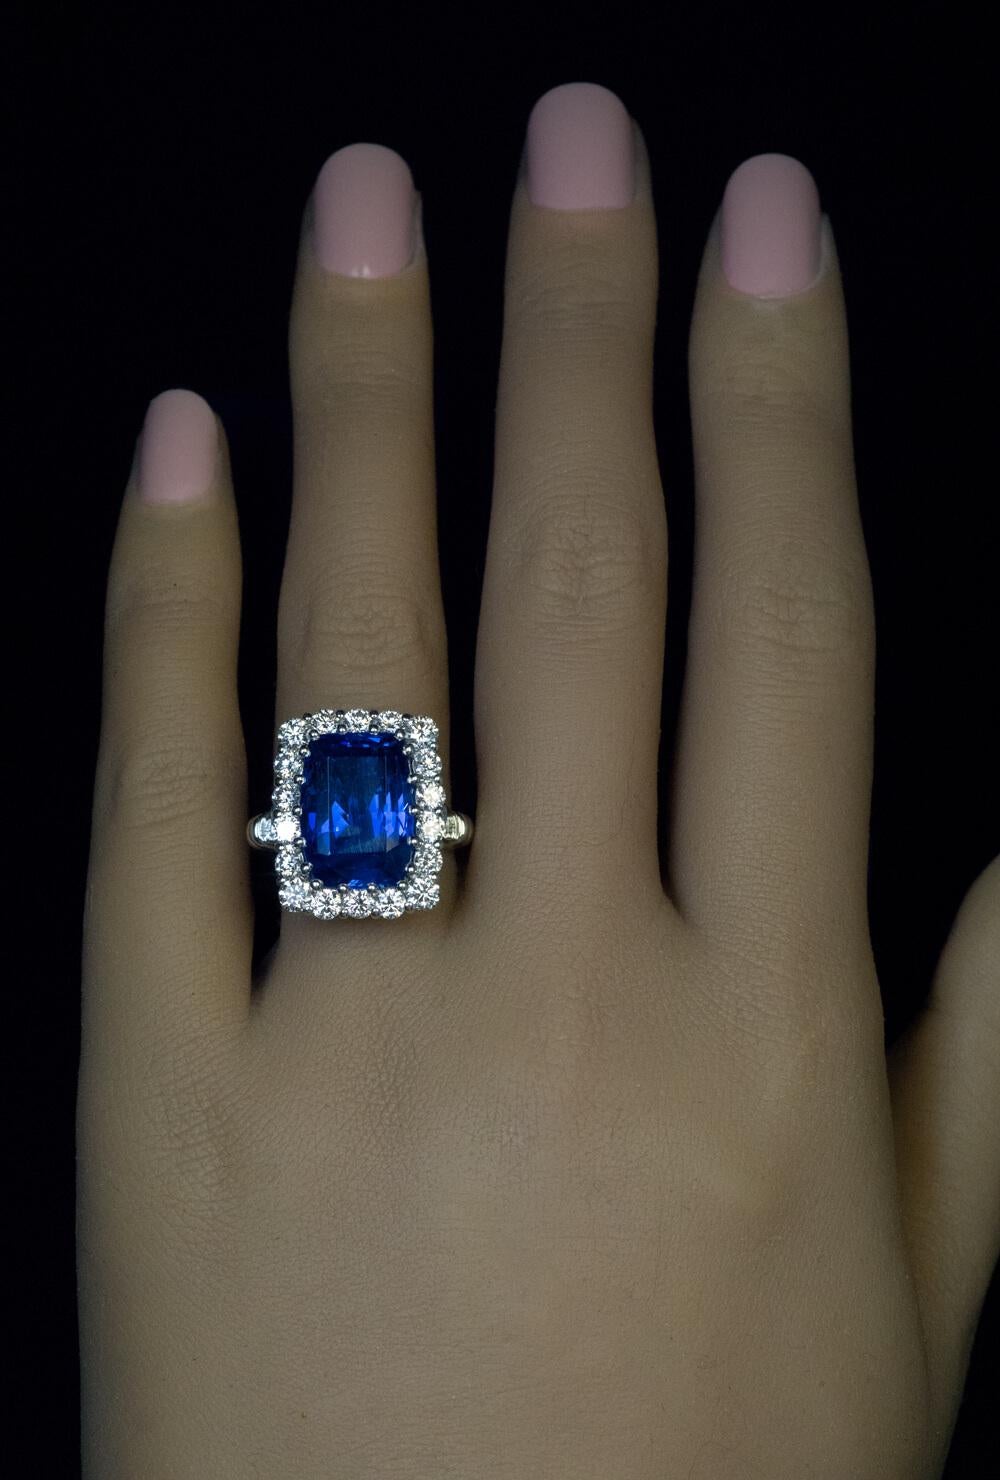 An 11.51 ct old mine cut Ceylon sapphire of a vivid blue color is set in a modern platinum and diamond ring.  The diamonds are bright white and clean: F-G color, VS clarity. Total diamond weight is 1.61 ct.  The sapphire and diamond cluster measures